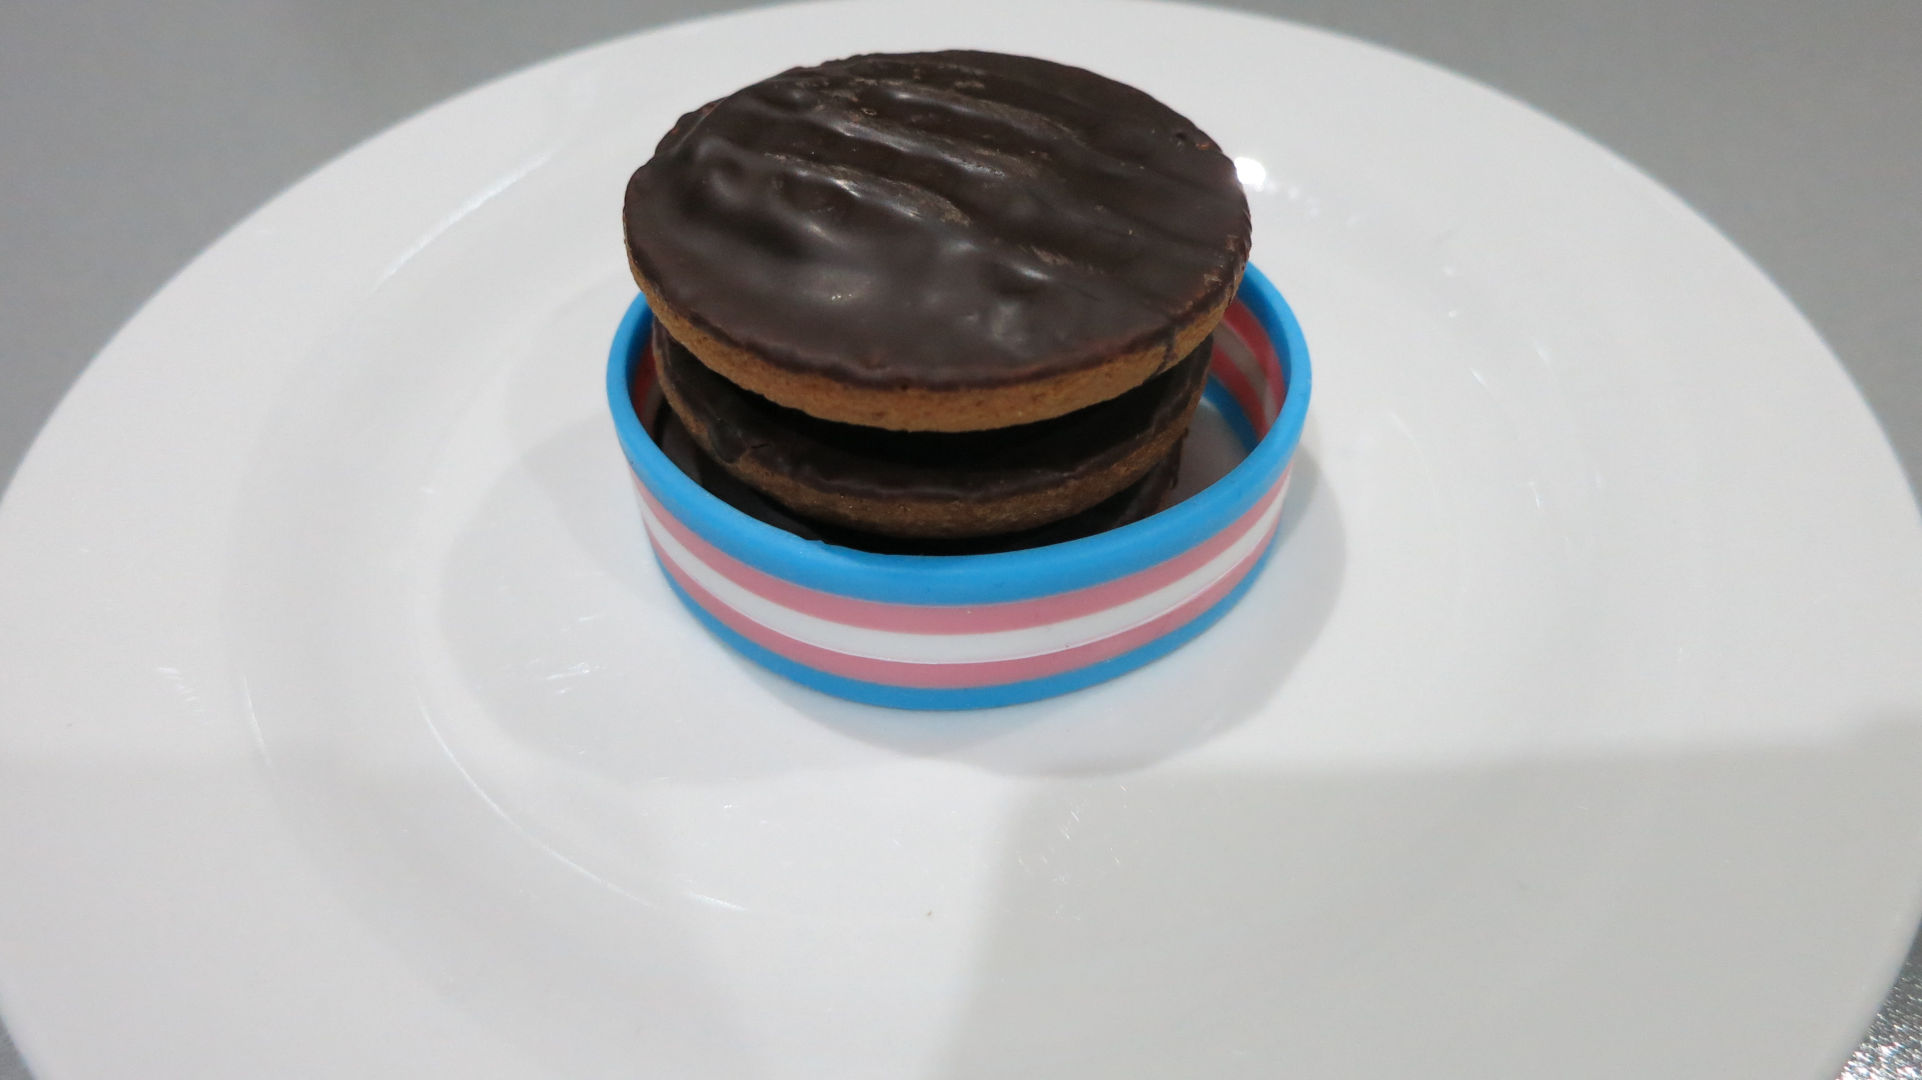 A stack of JaffaCakes, wrapped in the transgender pride flag.